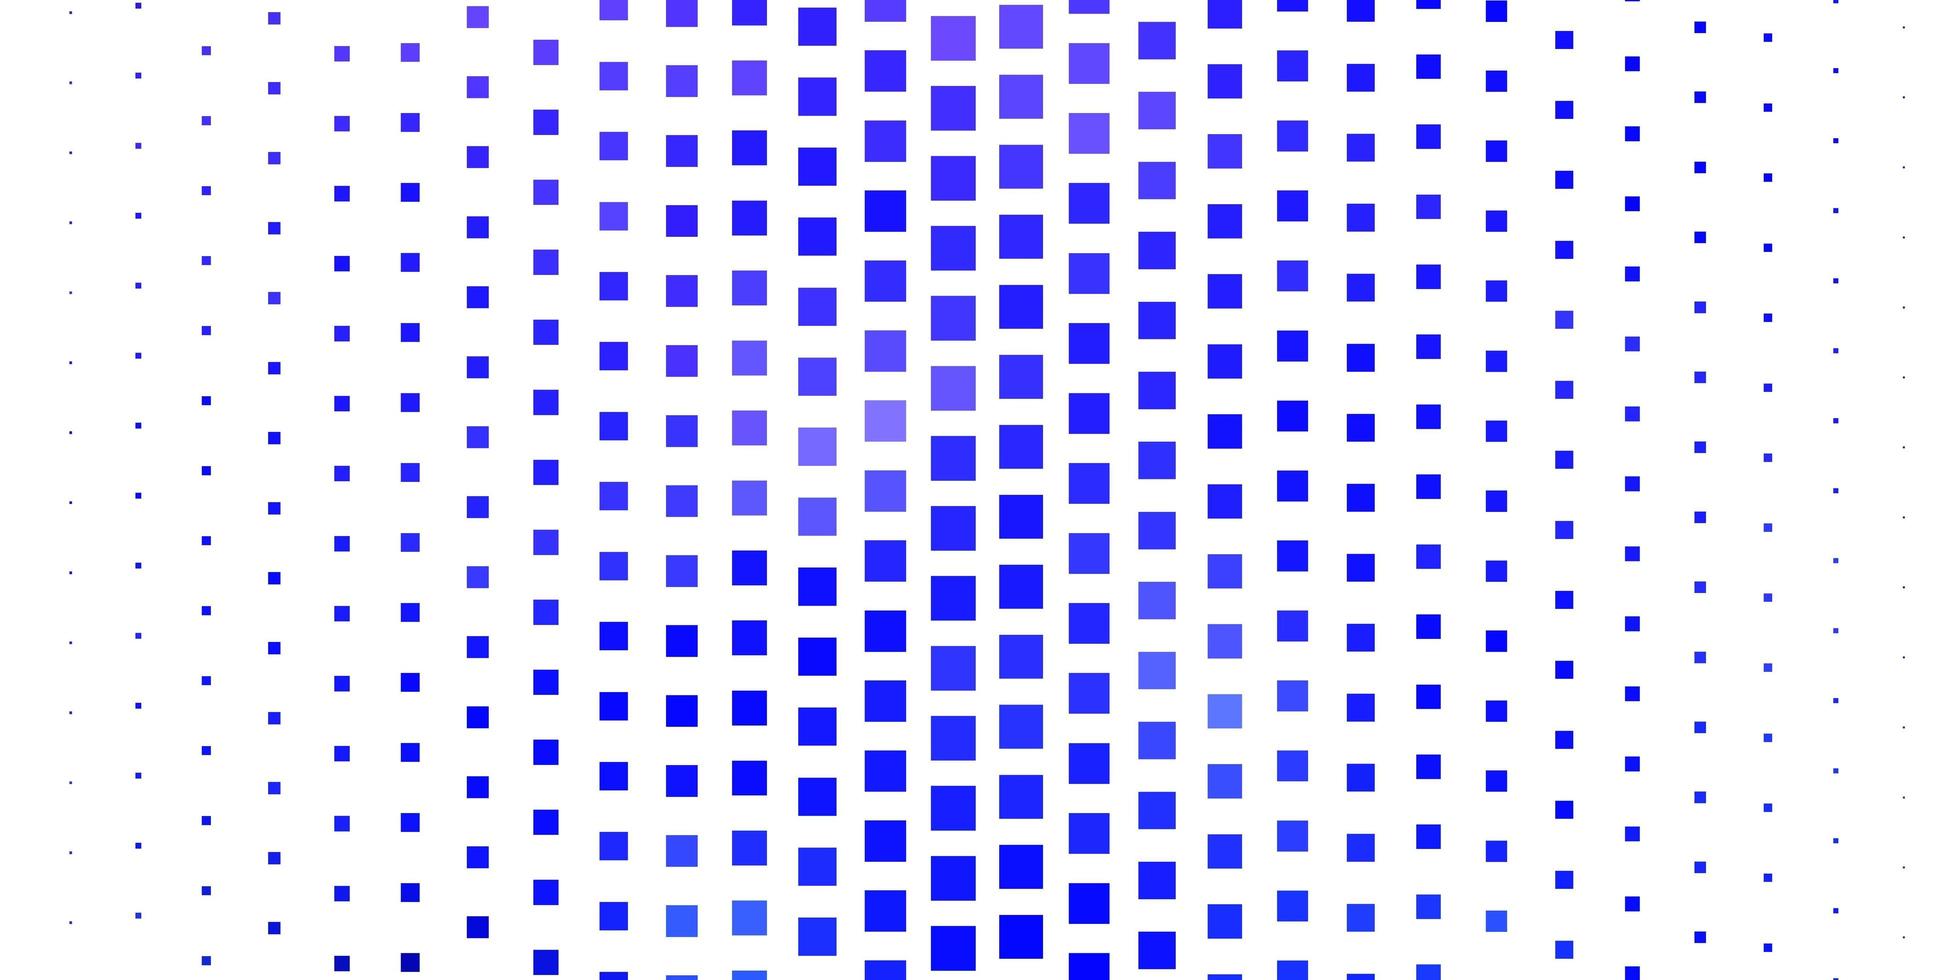 Light Purple vector layout with lines, rectangles. Colorful illustration with gradient rectangles and squares. Best design for your ad, poster, banner.